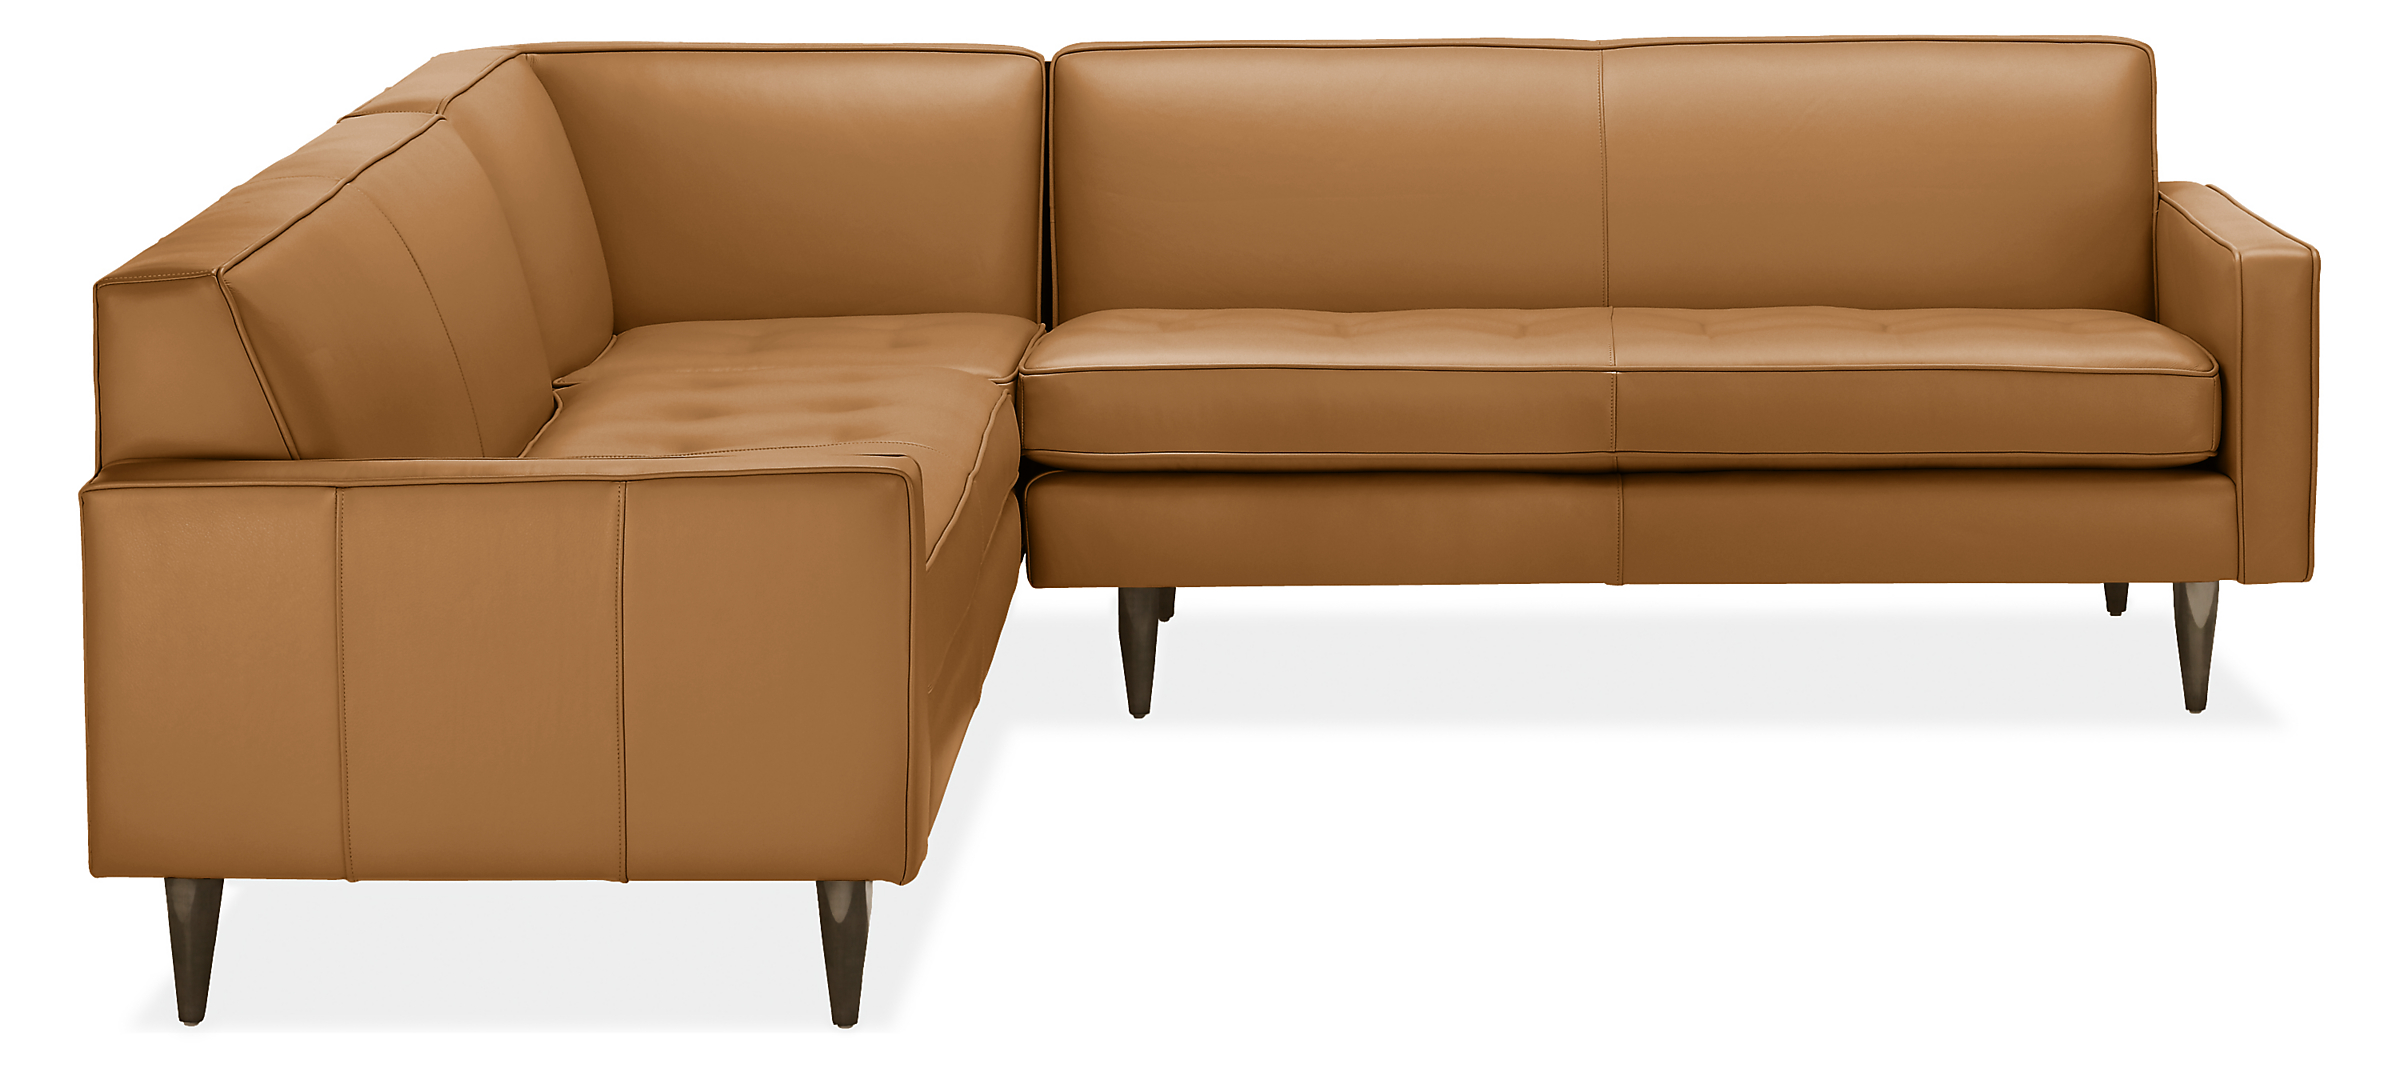 Reese Custom Leather Sectional